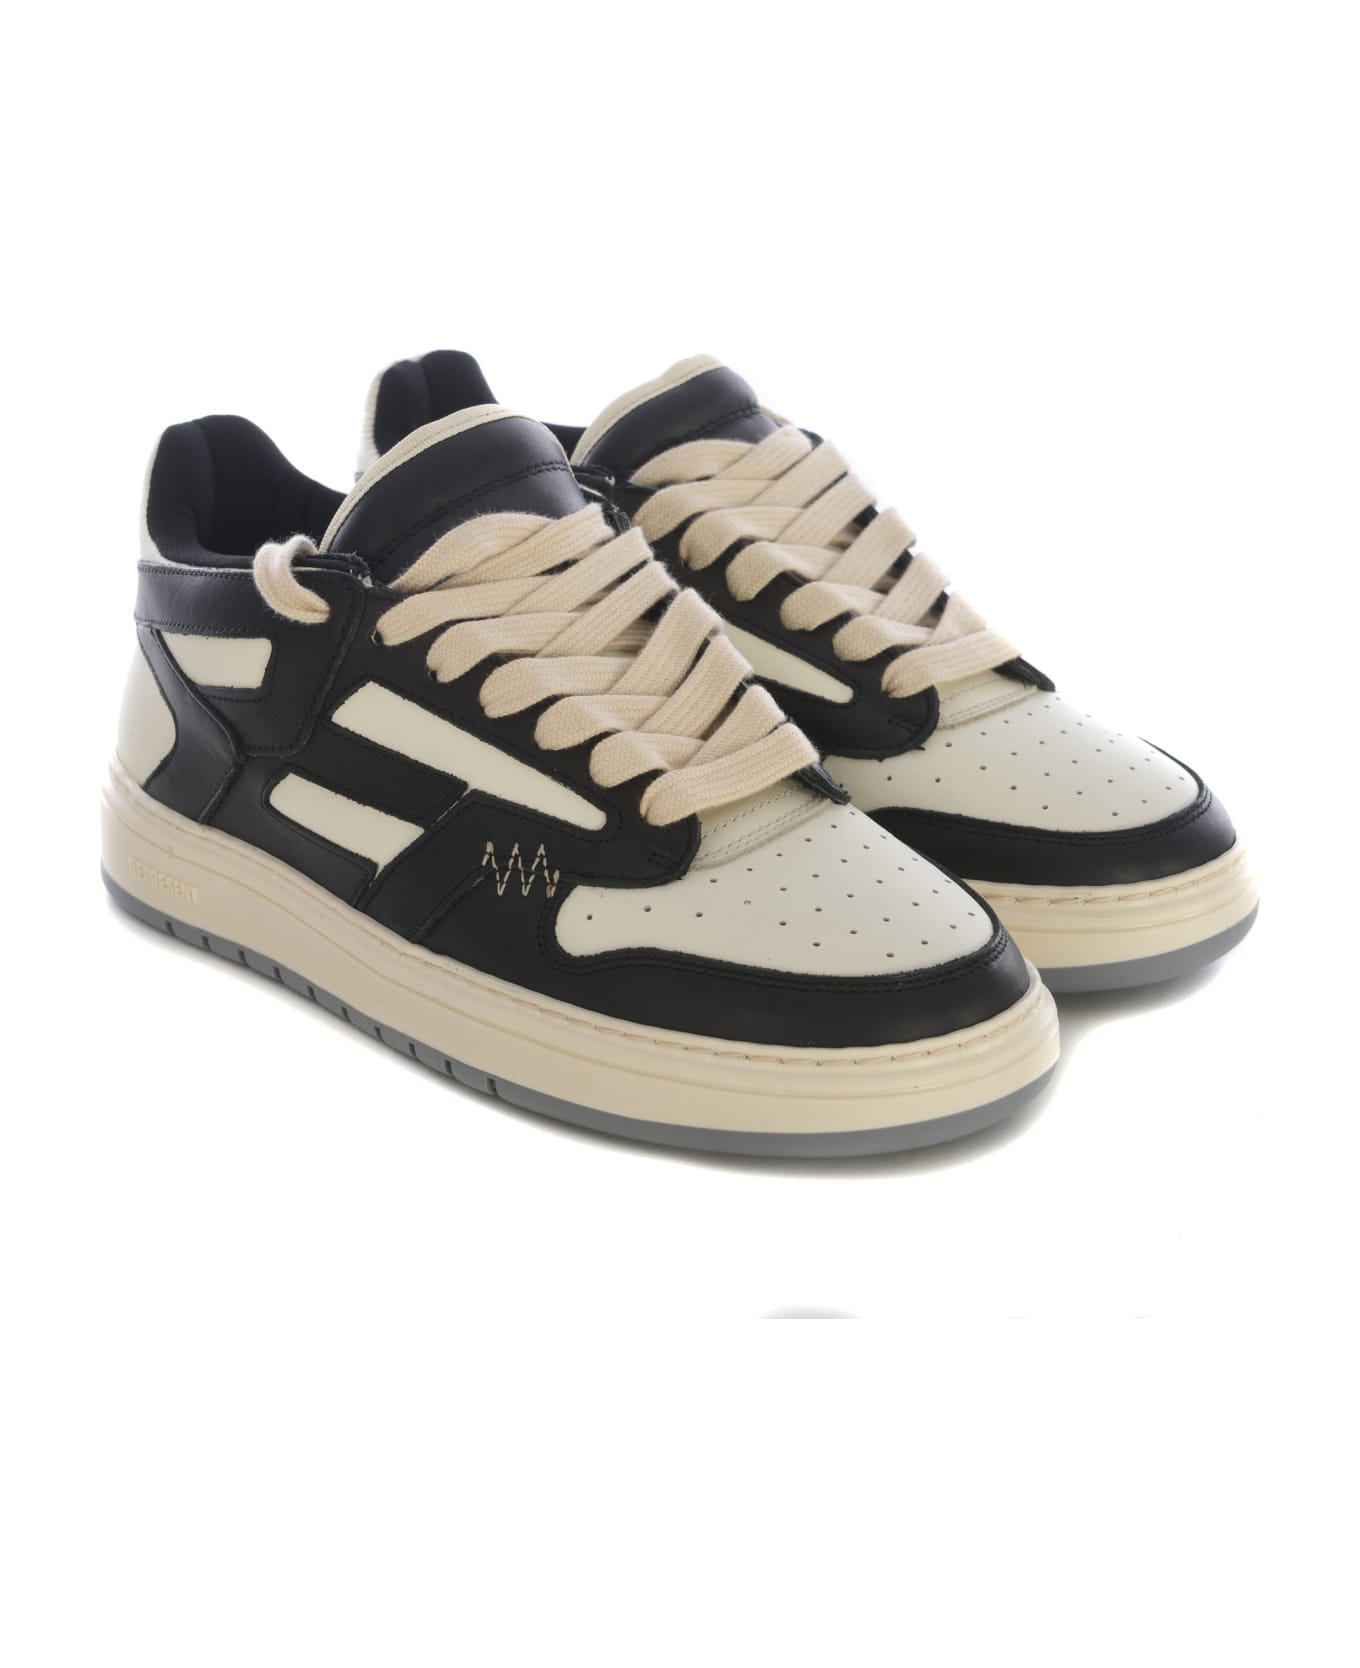 REPRESENT Sneakers Represent Made Of Leather - Crema スニーカー